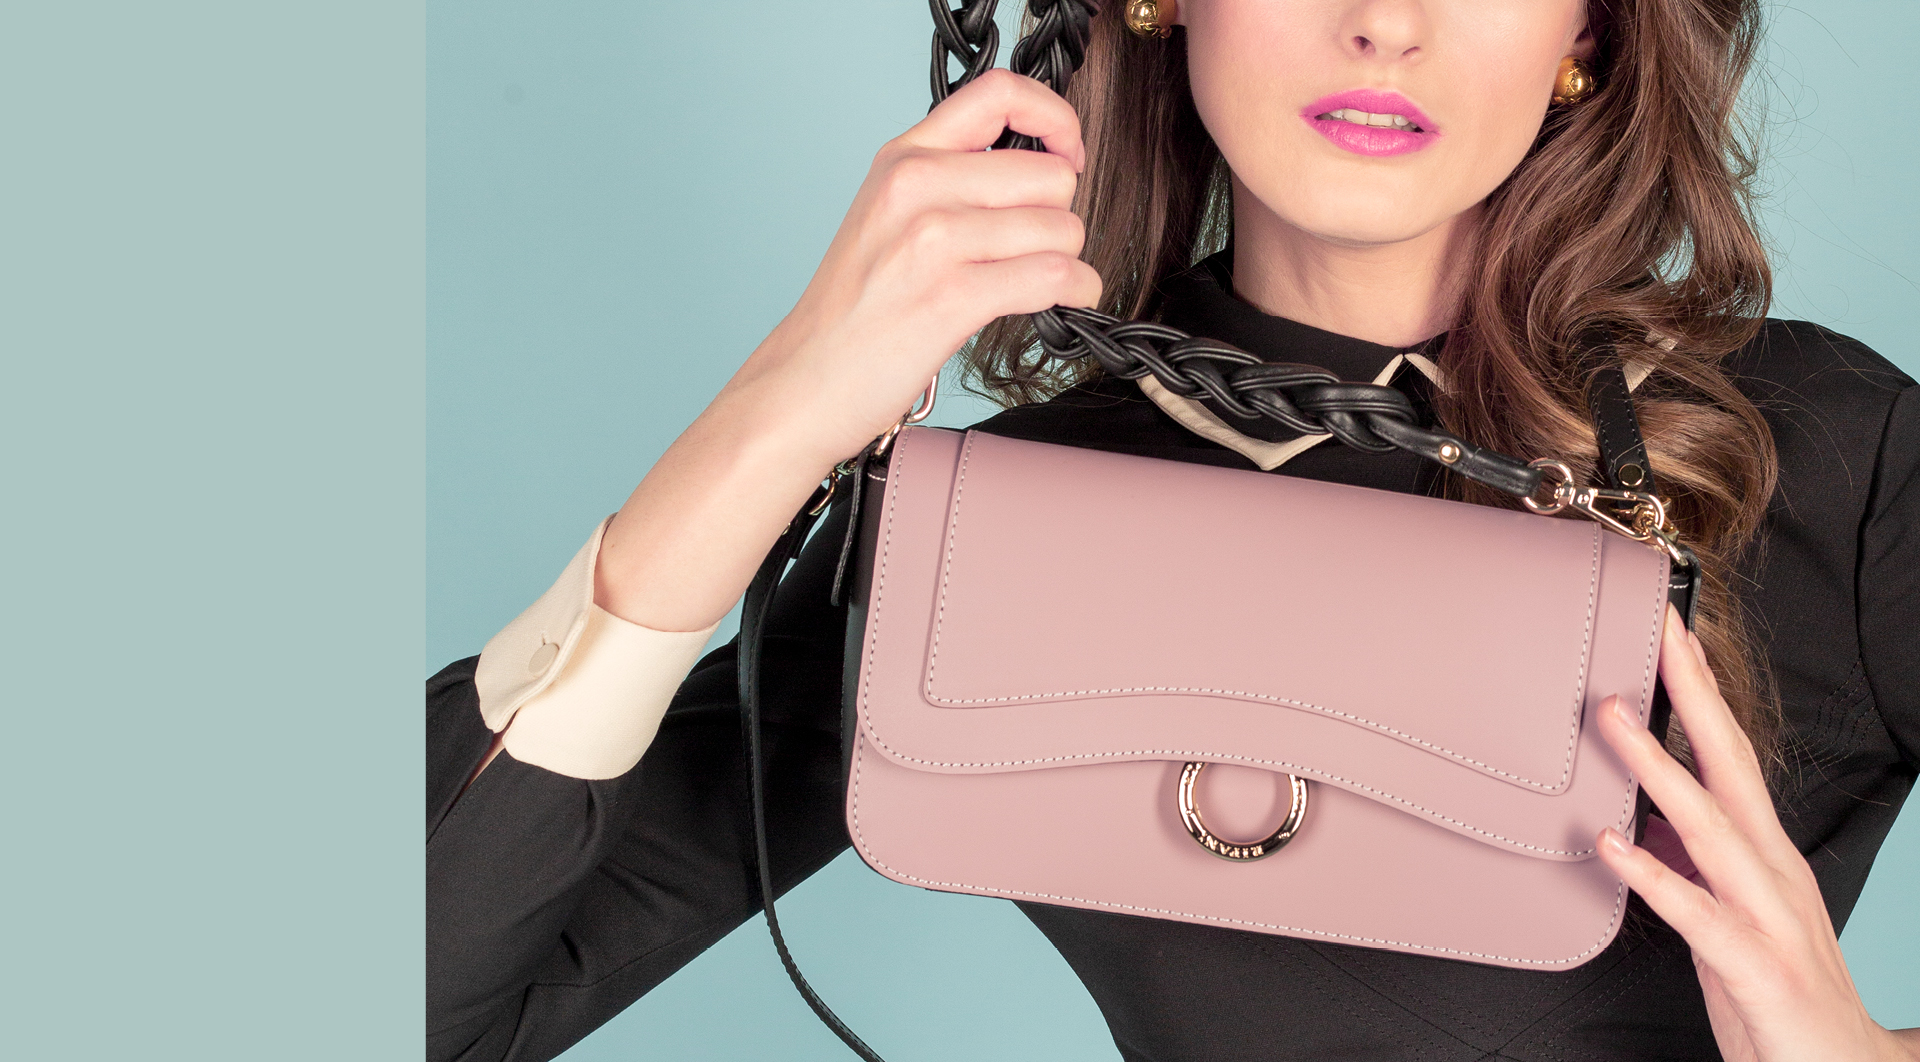 Leather bags, leather goods and accessories, made in Italy | Ripani